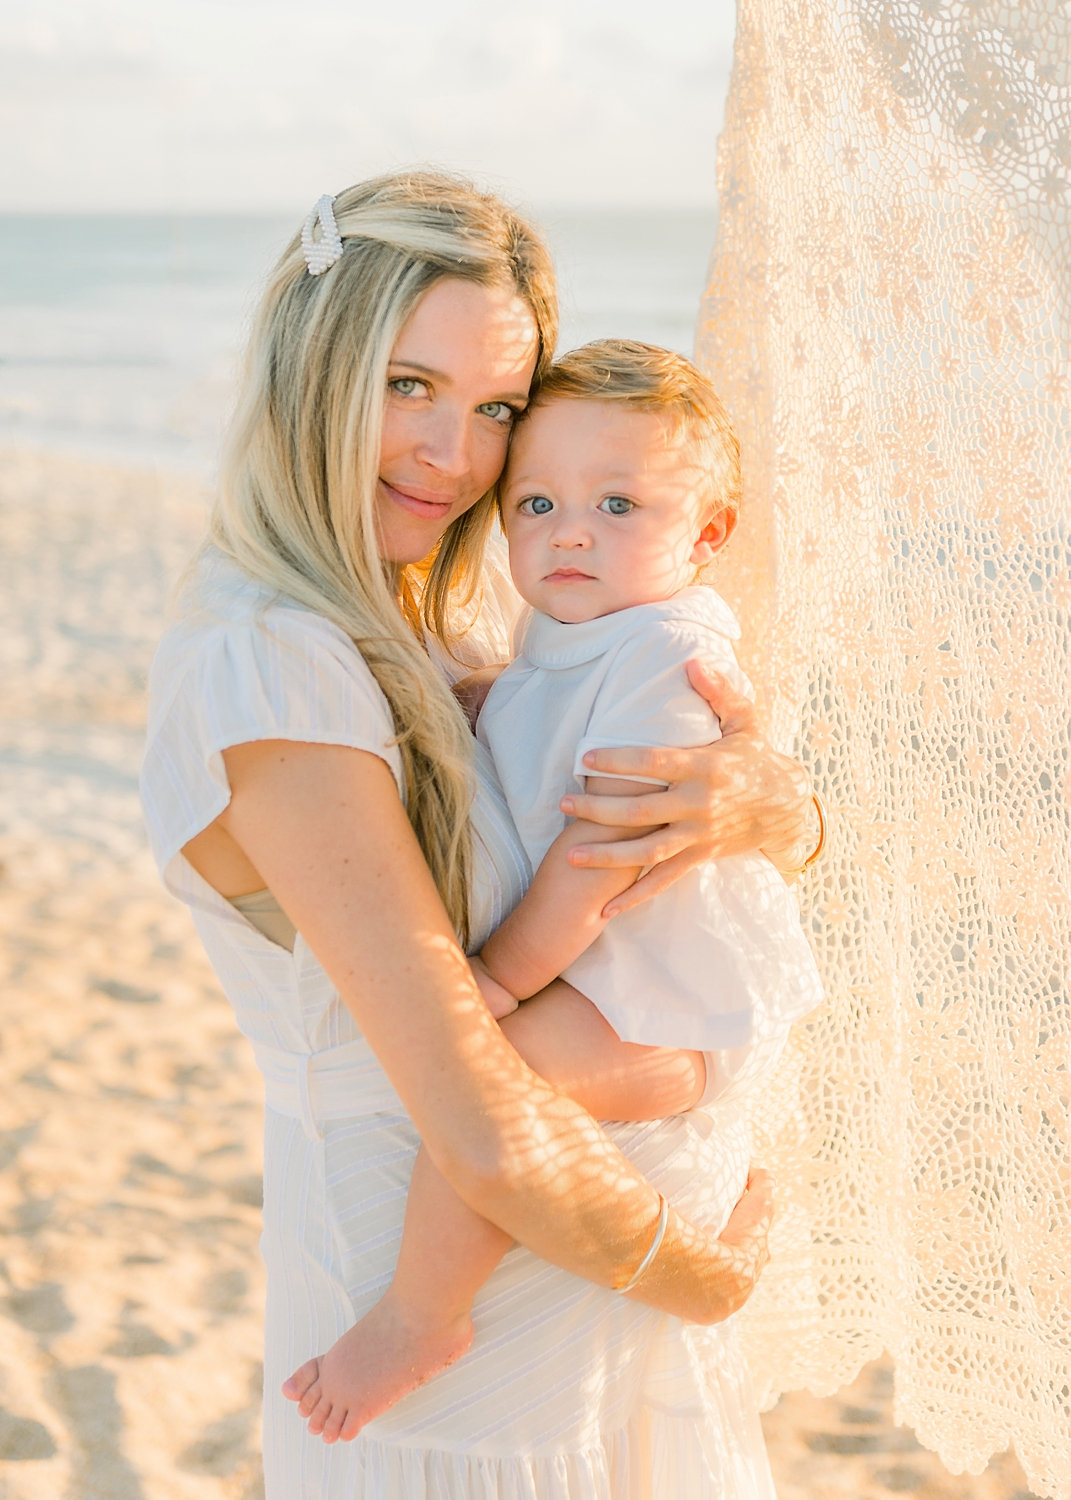 golden hour beach photography Florida, Rya Duncklee Photos, mother and child portrait